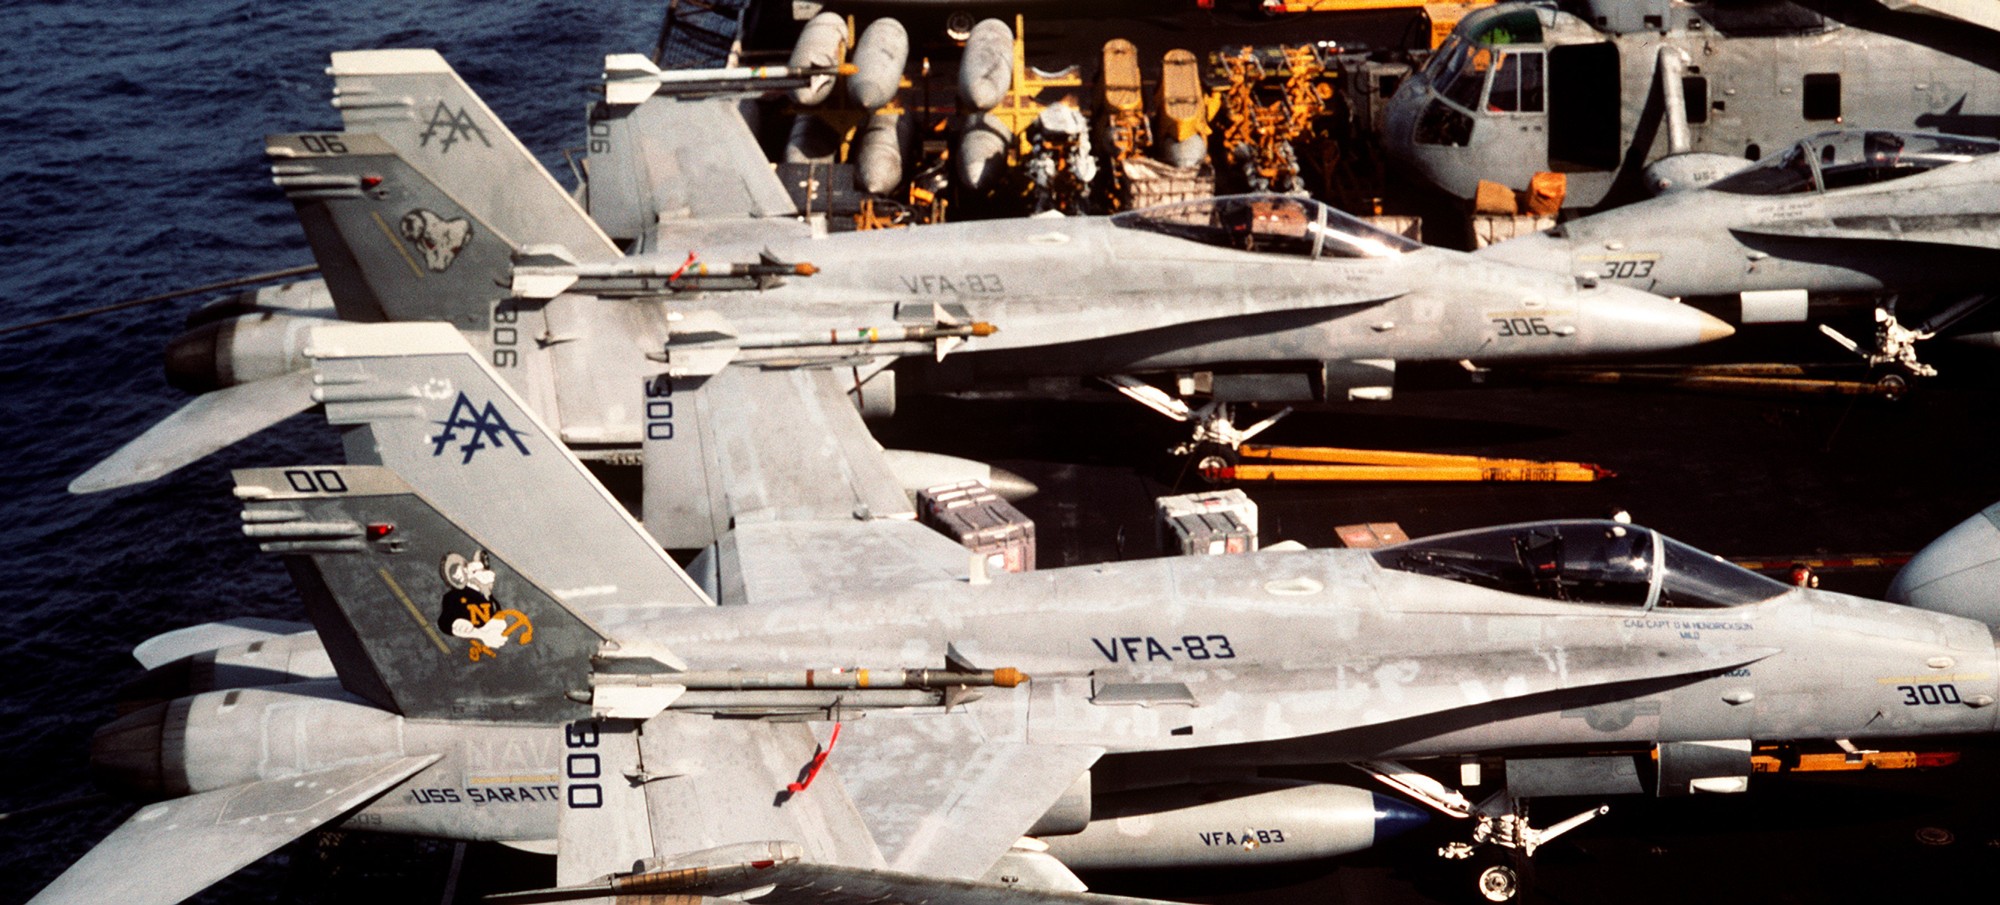 vfa-83 rampagers strike fighter squadron f/a-18c hornet cvw-17 uss saratoga cv-60 157